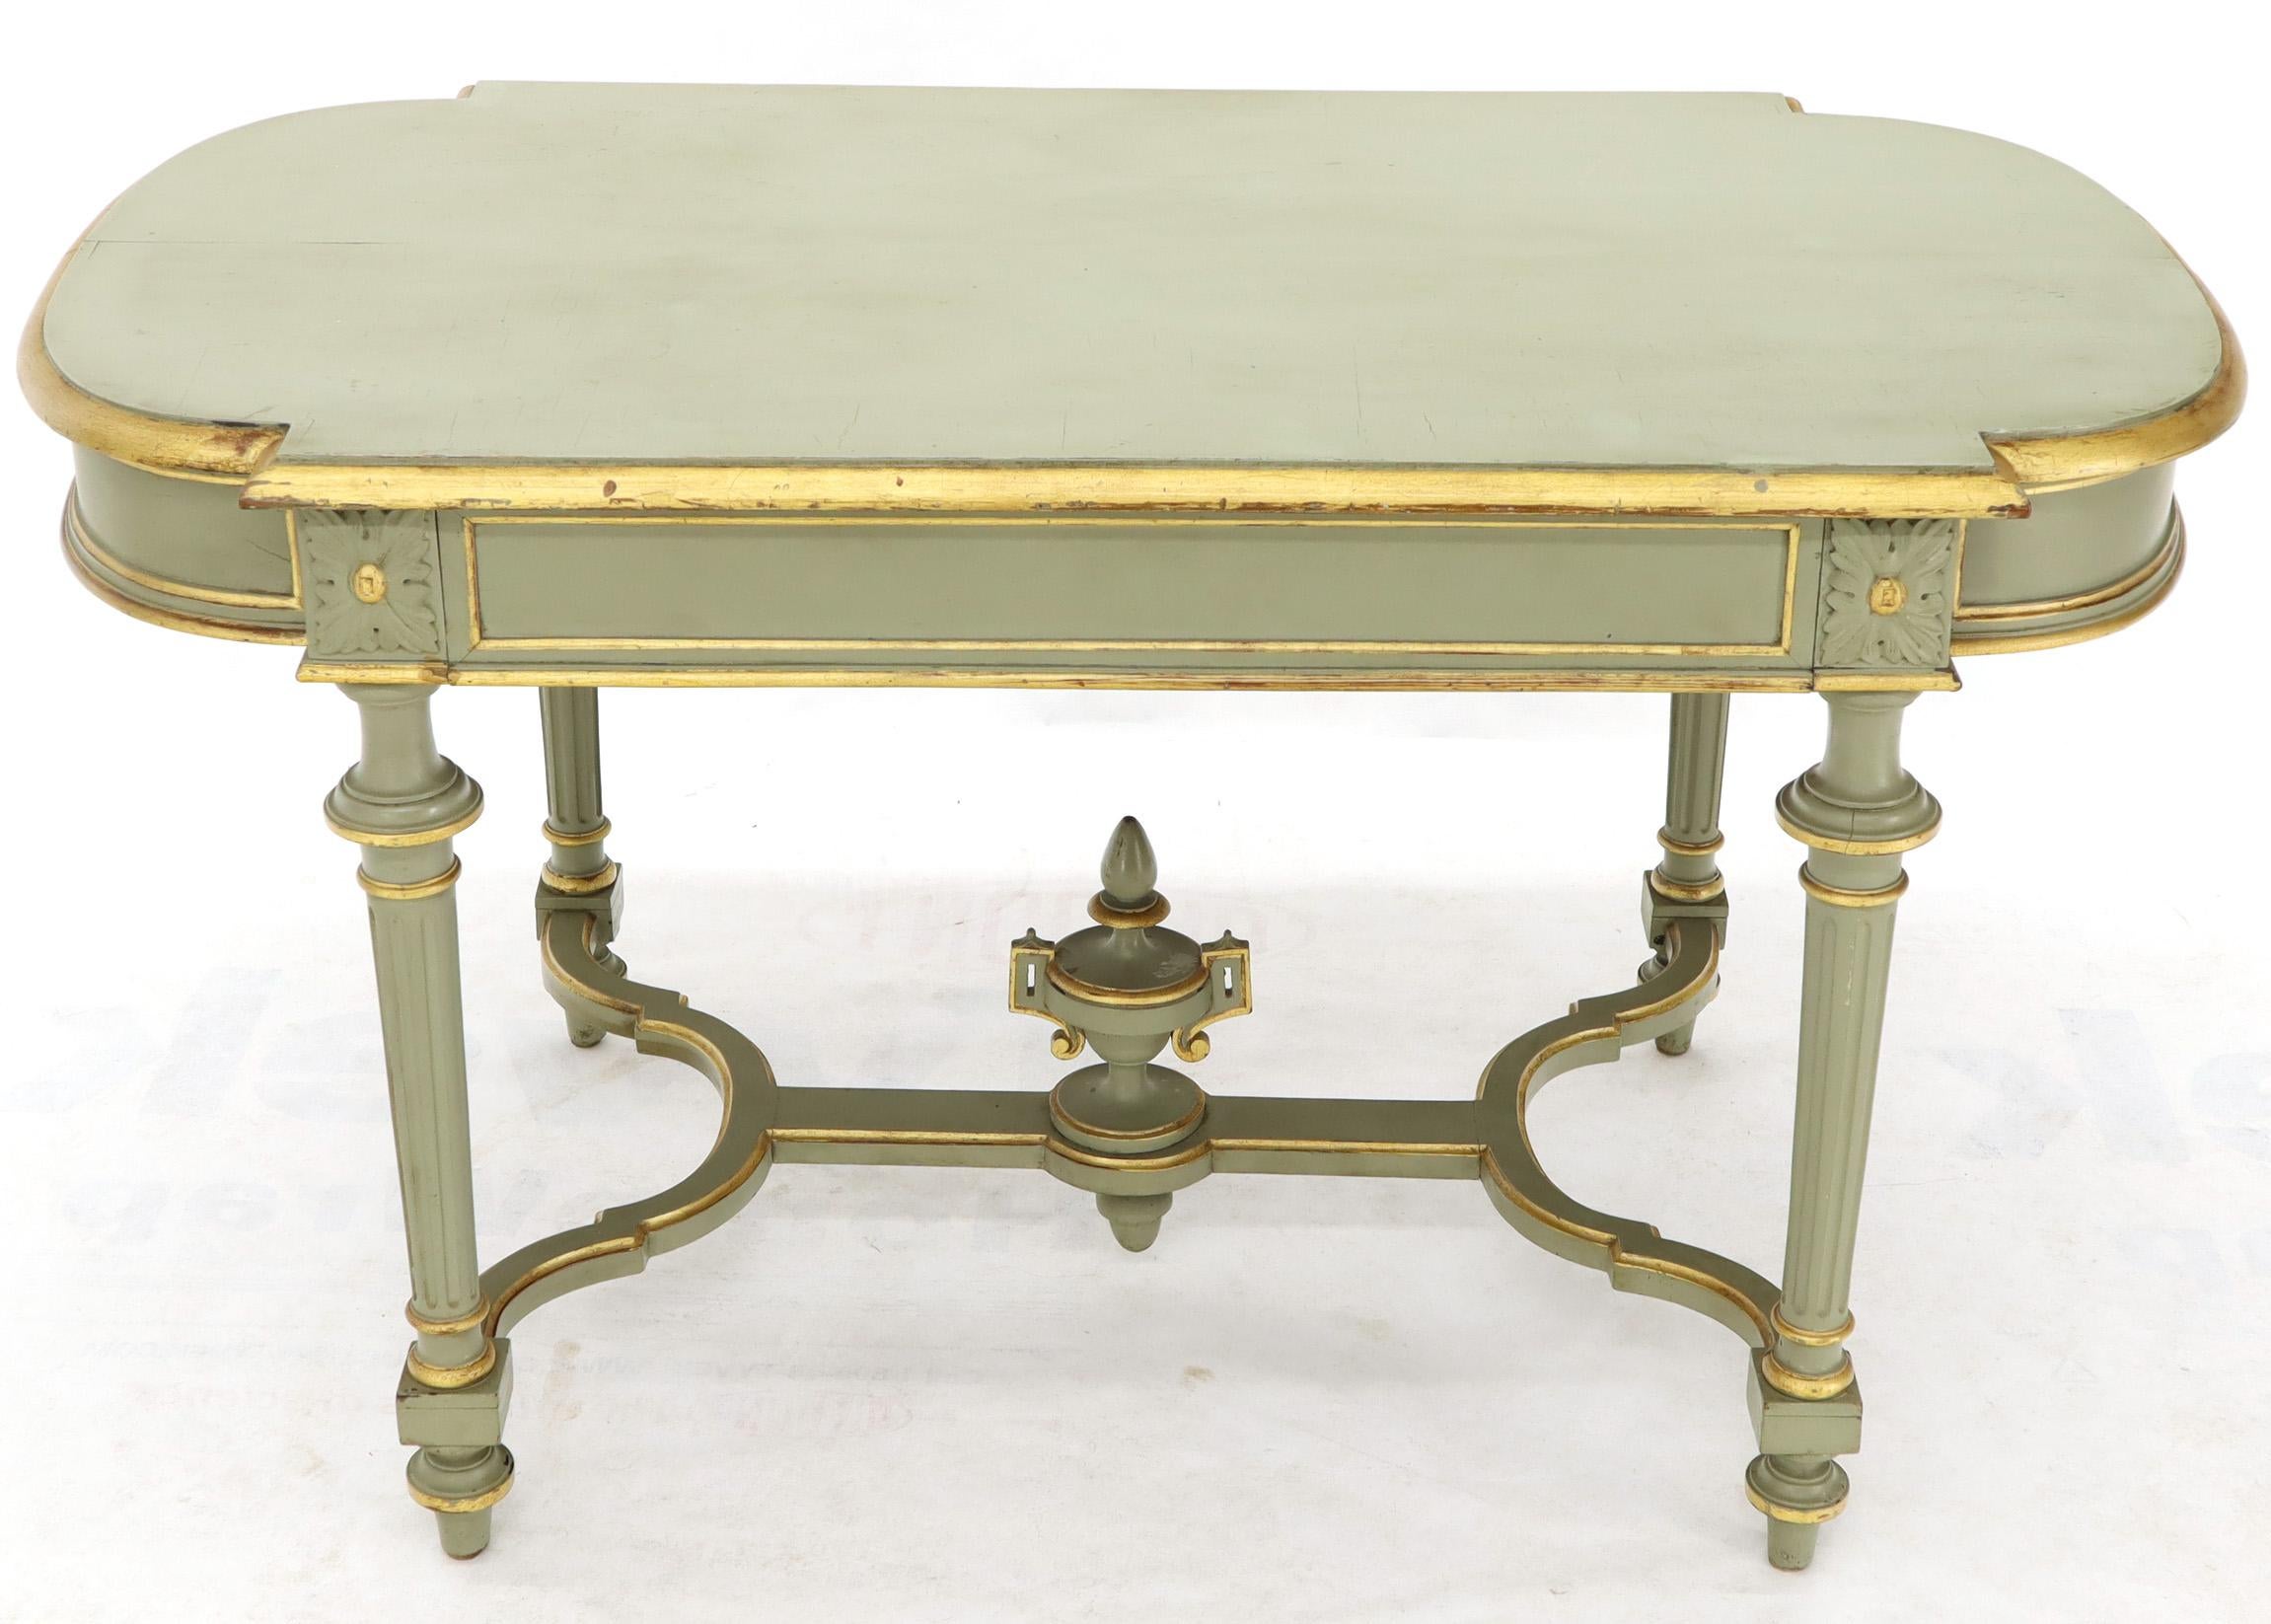 Shabby Chic and Gold Leaf Distressed Antique Table Desk Console Grande Console en vente 4